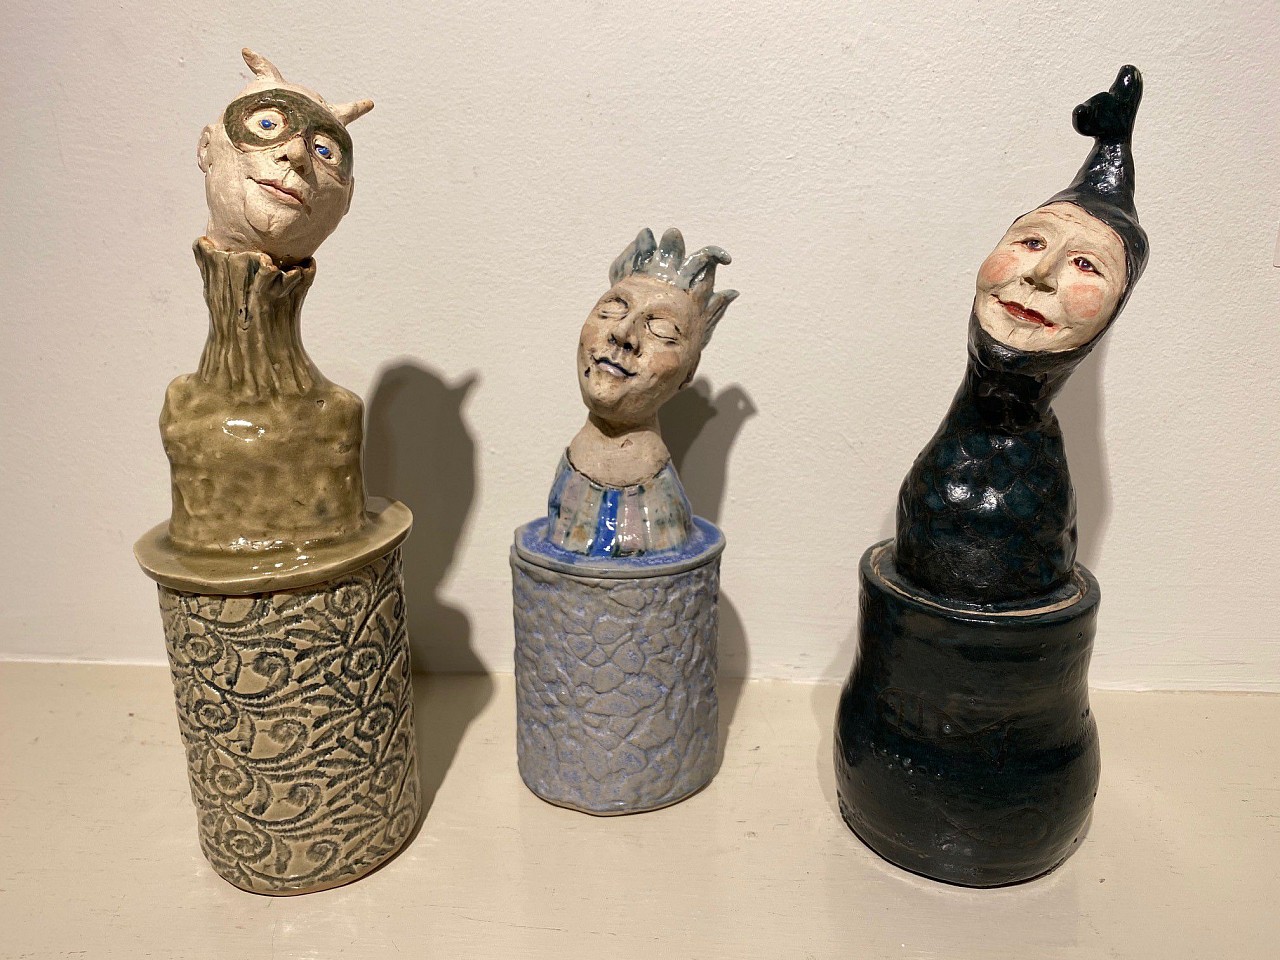 Jeanine Pennell, Characters Group 7
glazed ceramic, 6"" - 8""
JCAC 6292.07
$300